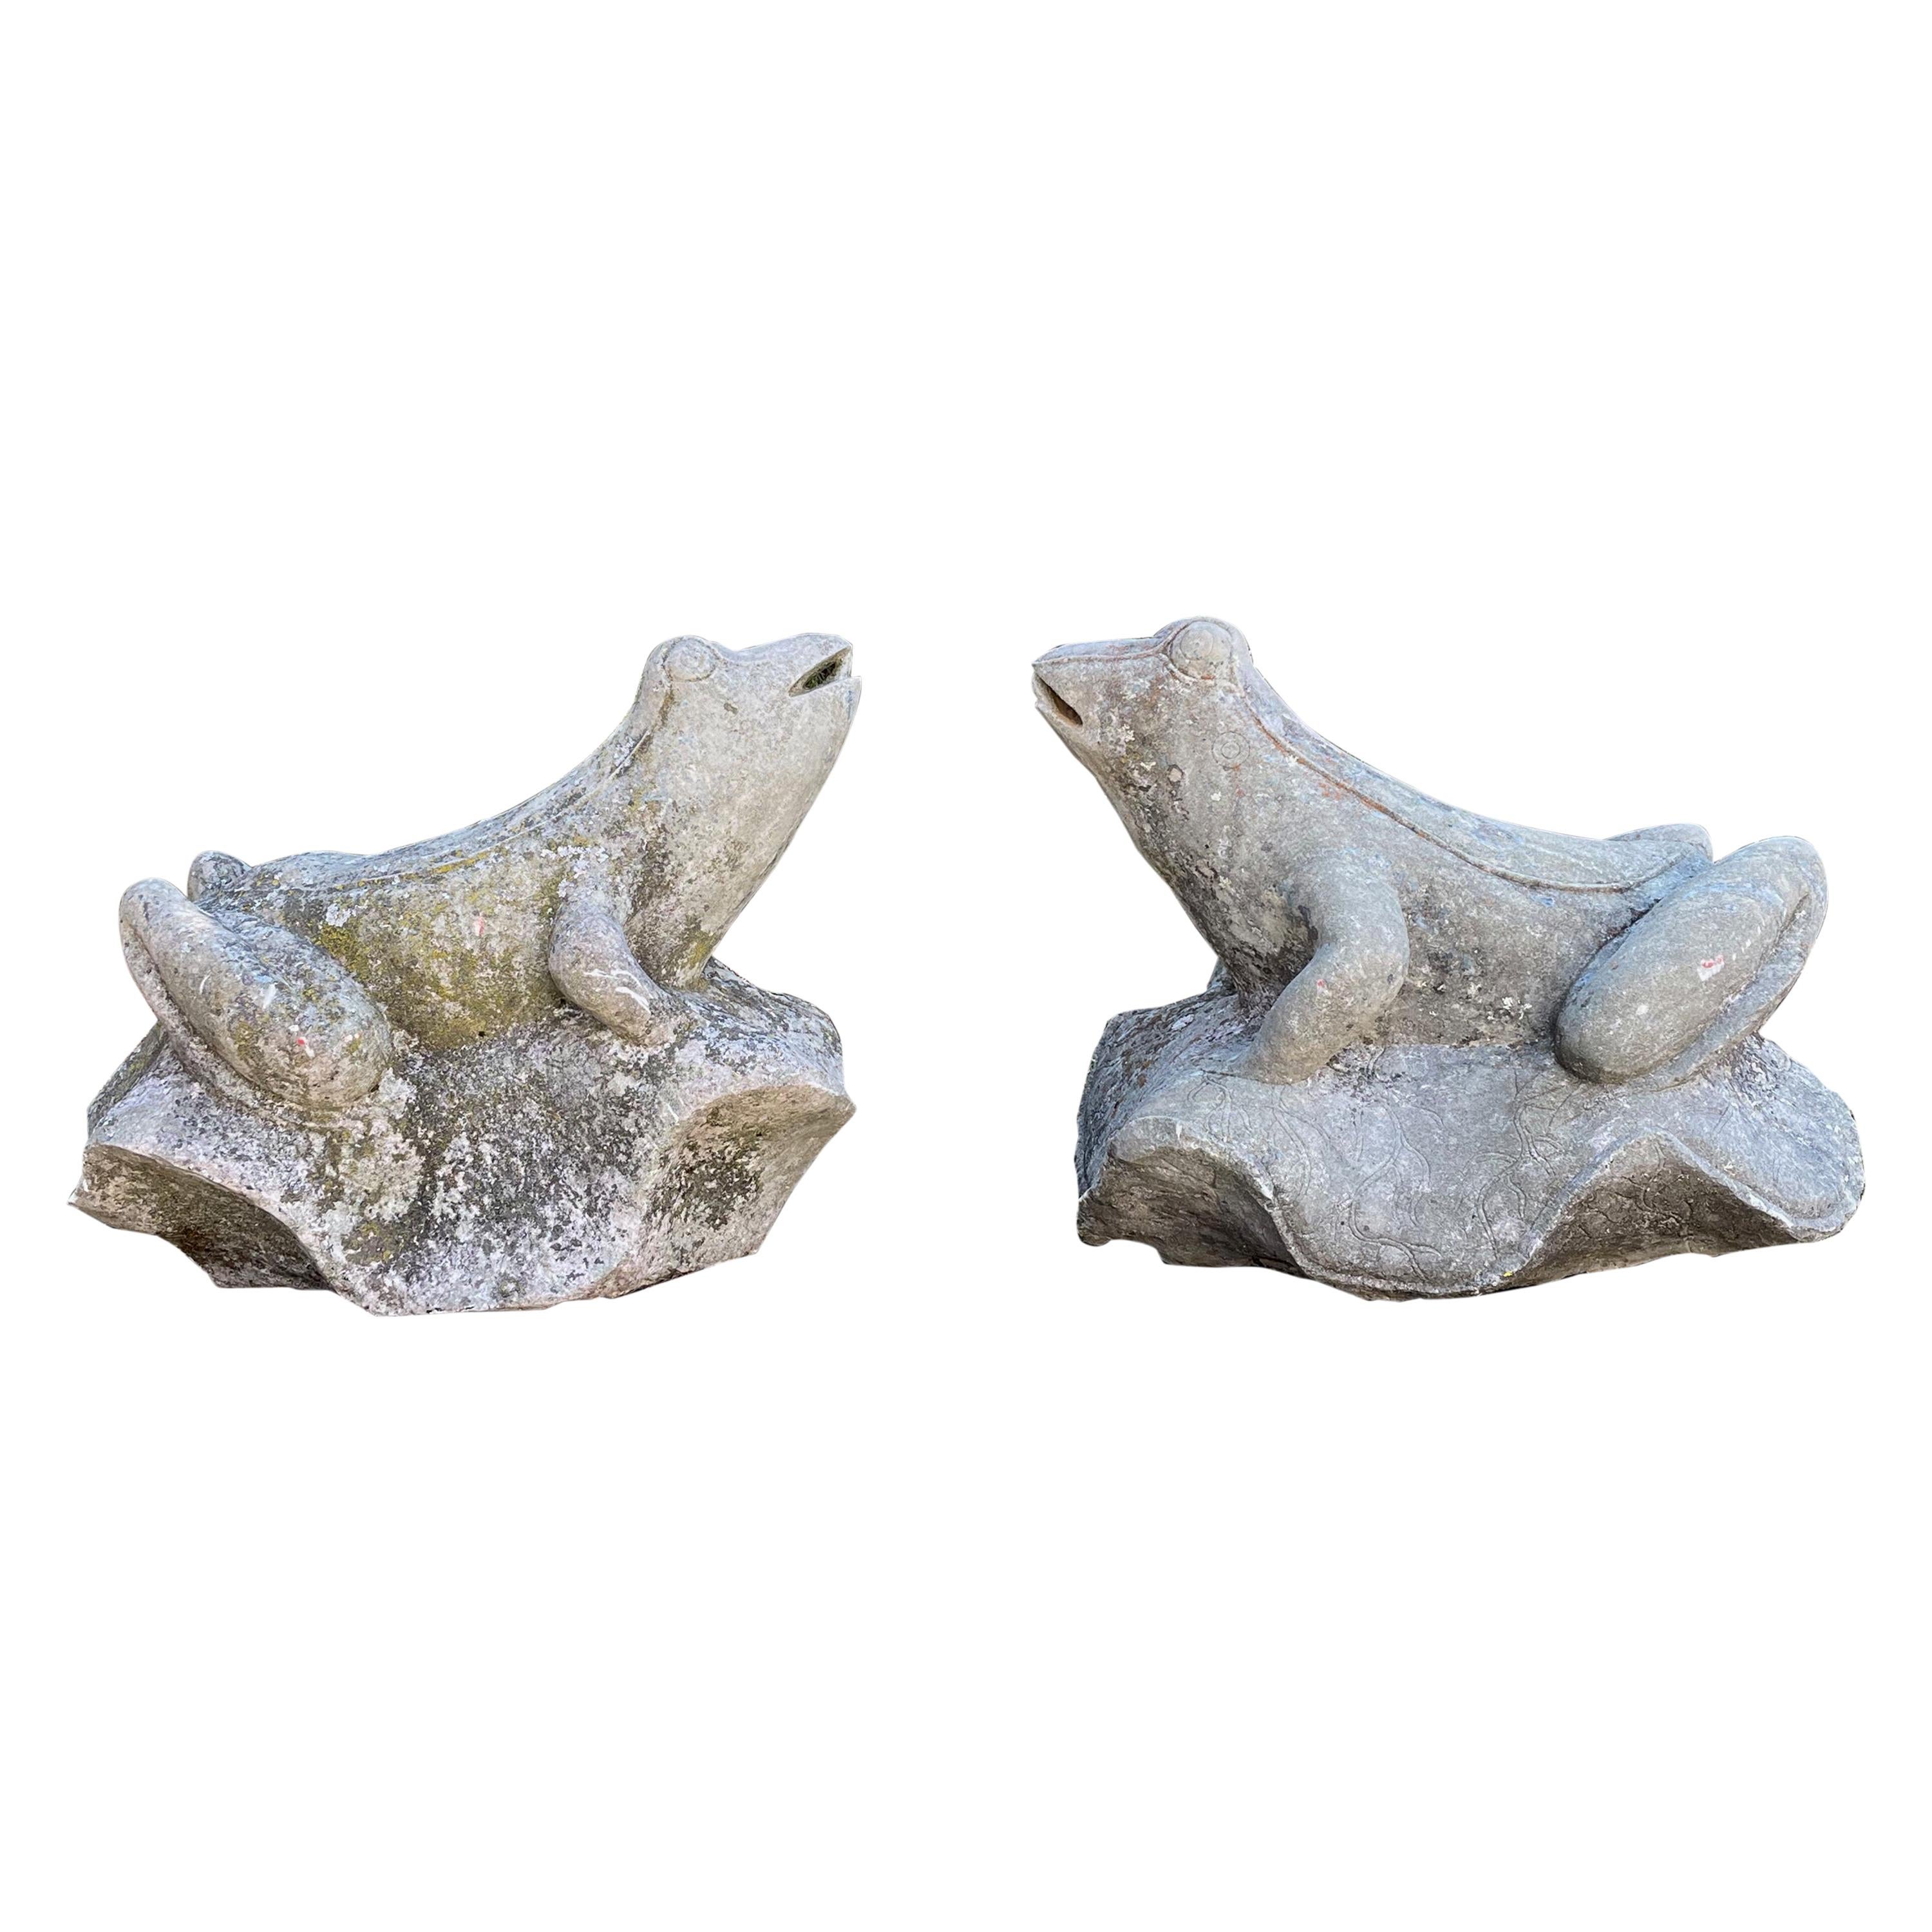 Pair of Over-Scale Carved Stone Frogs from Mercer House, Savannah